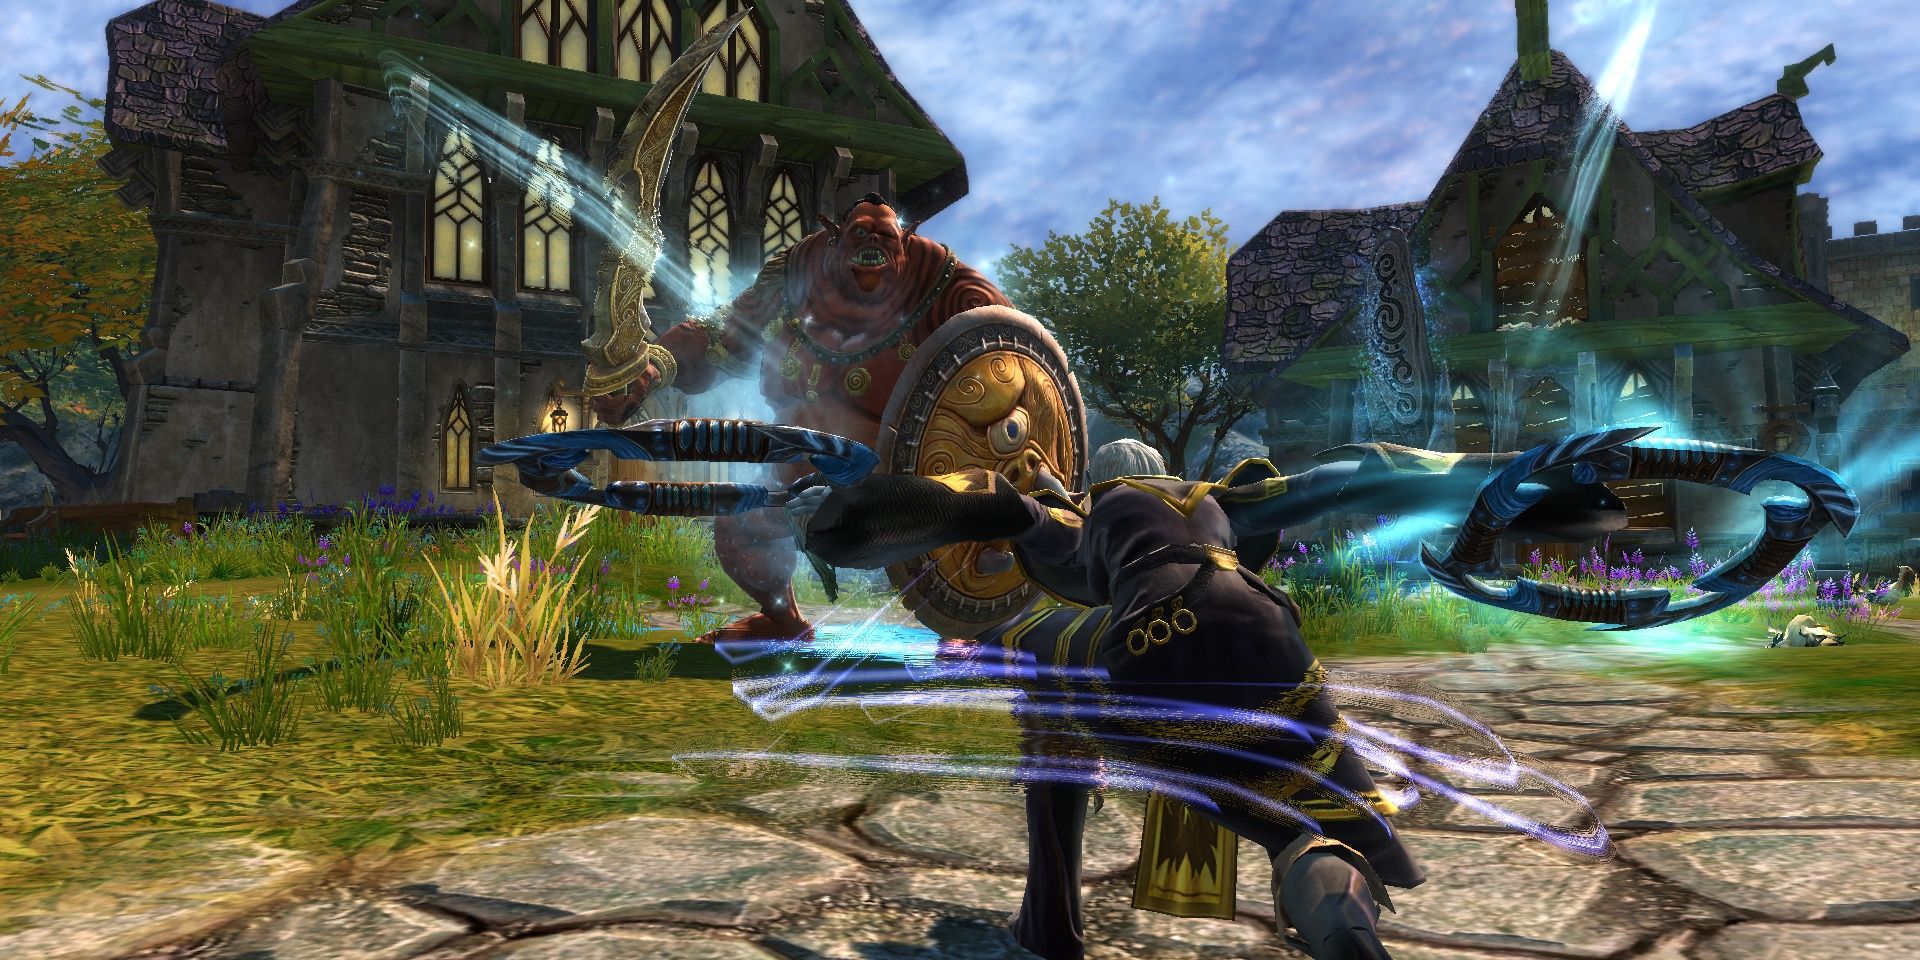 a cyclops fight in Kingdoms of Amalur: Re-Reckoning